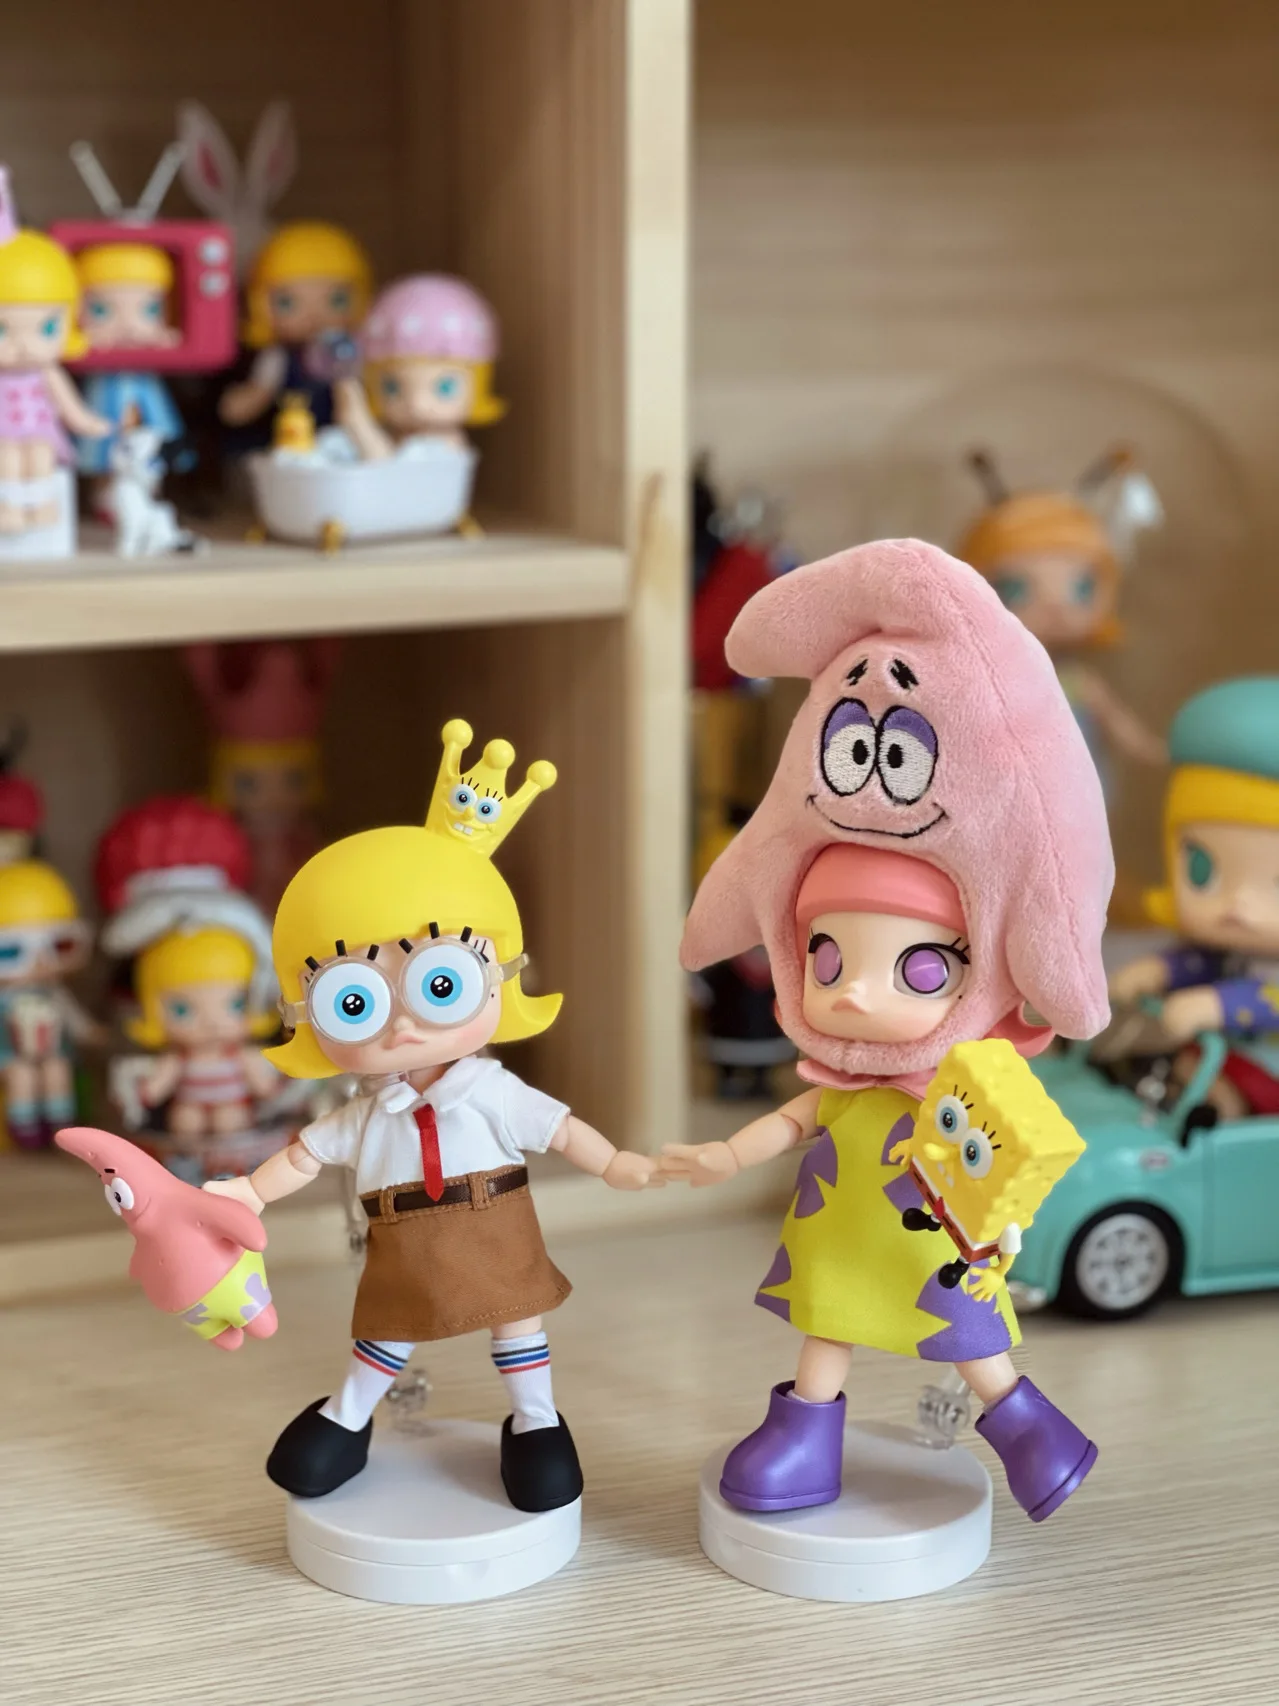 

POP MART MOLLY BJD Doll 12 Collaboration Kawaii Figure Pink Hair Yellow Crown Movable Joint Body Girl Fashion Toy Birthday Gift